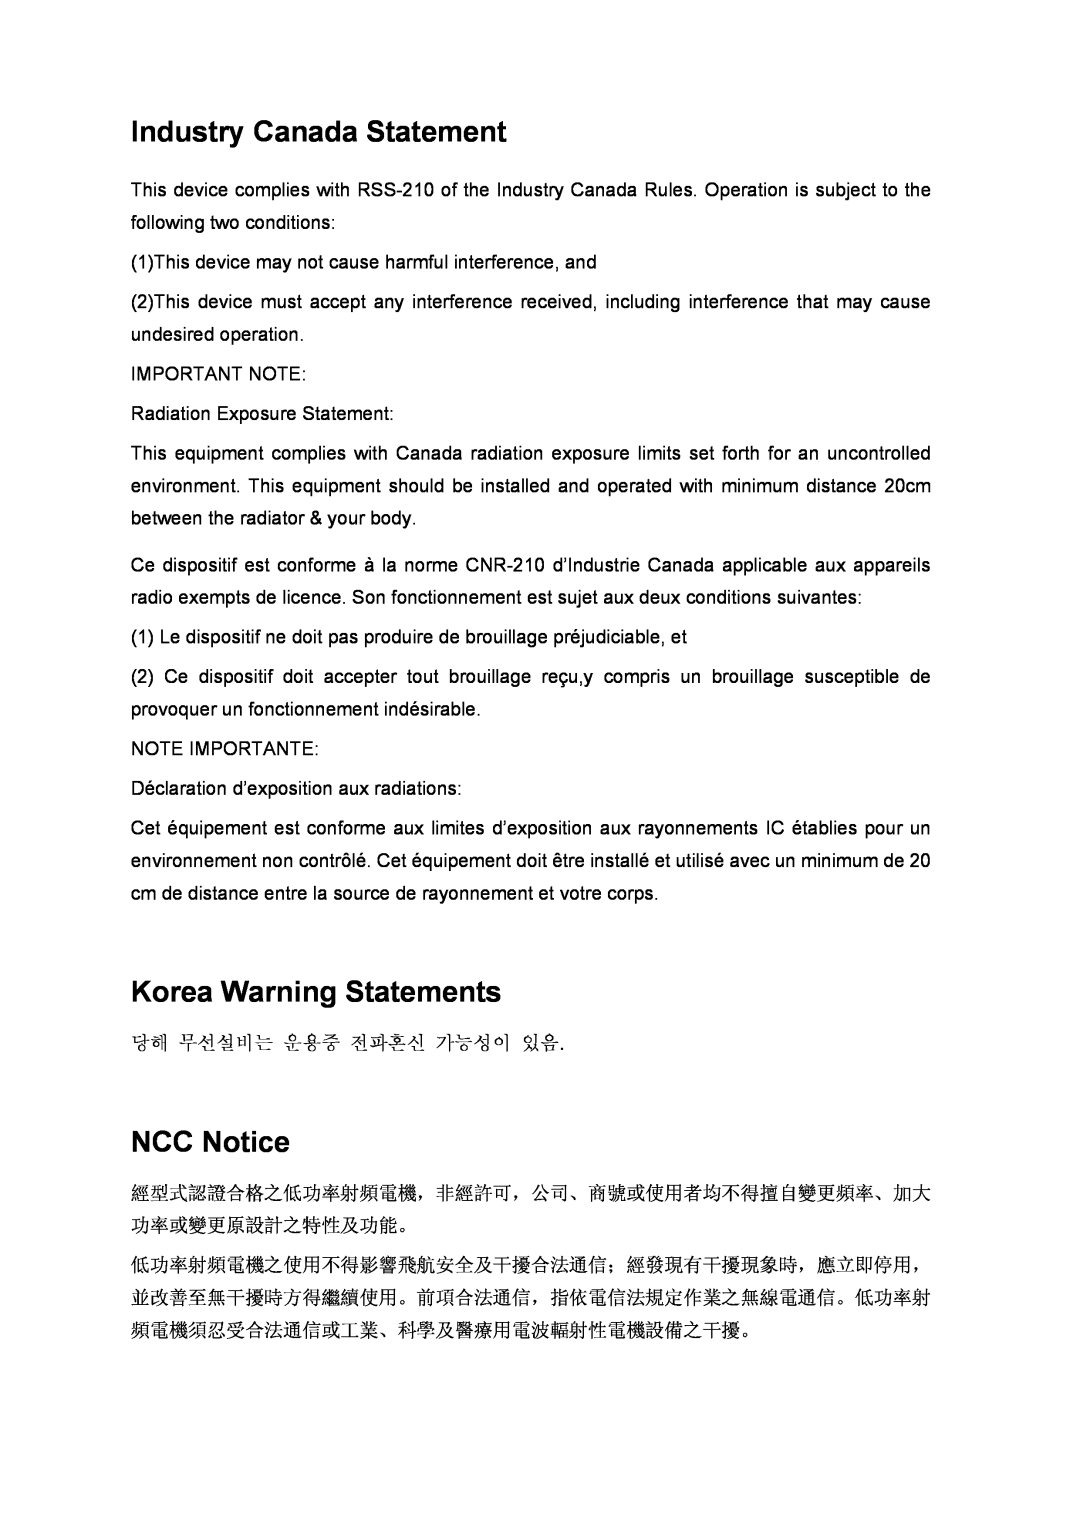 TP-Link TL-WN822N manual Industry Canada Statement, Korea Warning Statements, NCC Notice 